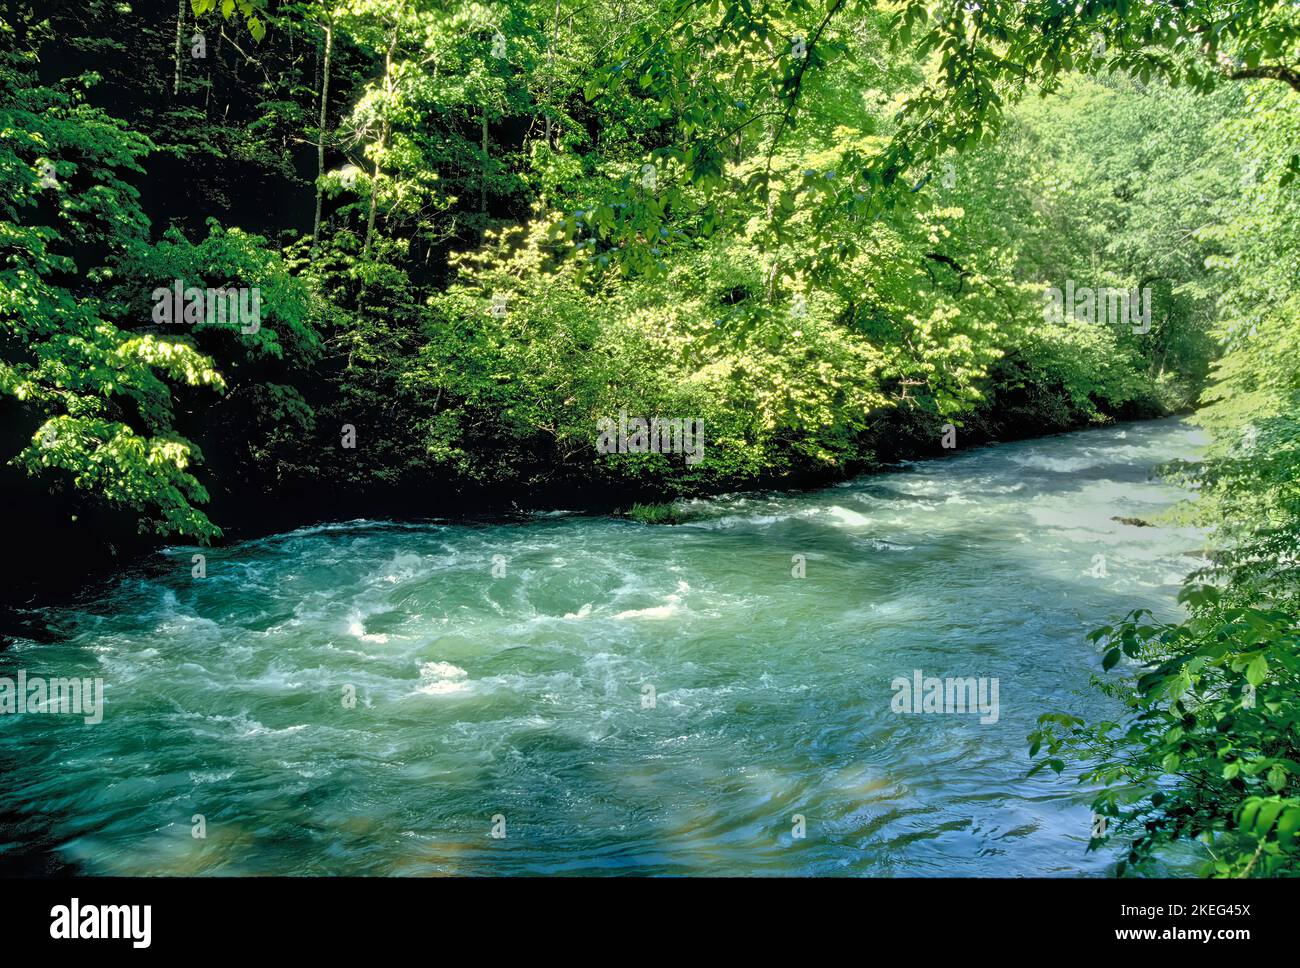 Greer Spring is the second largest spring in the Ozarks, with an average discharge of 360 cubic feet (10 m3) of water per second. Greer Spring was des Stock Photo